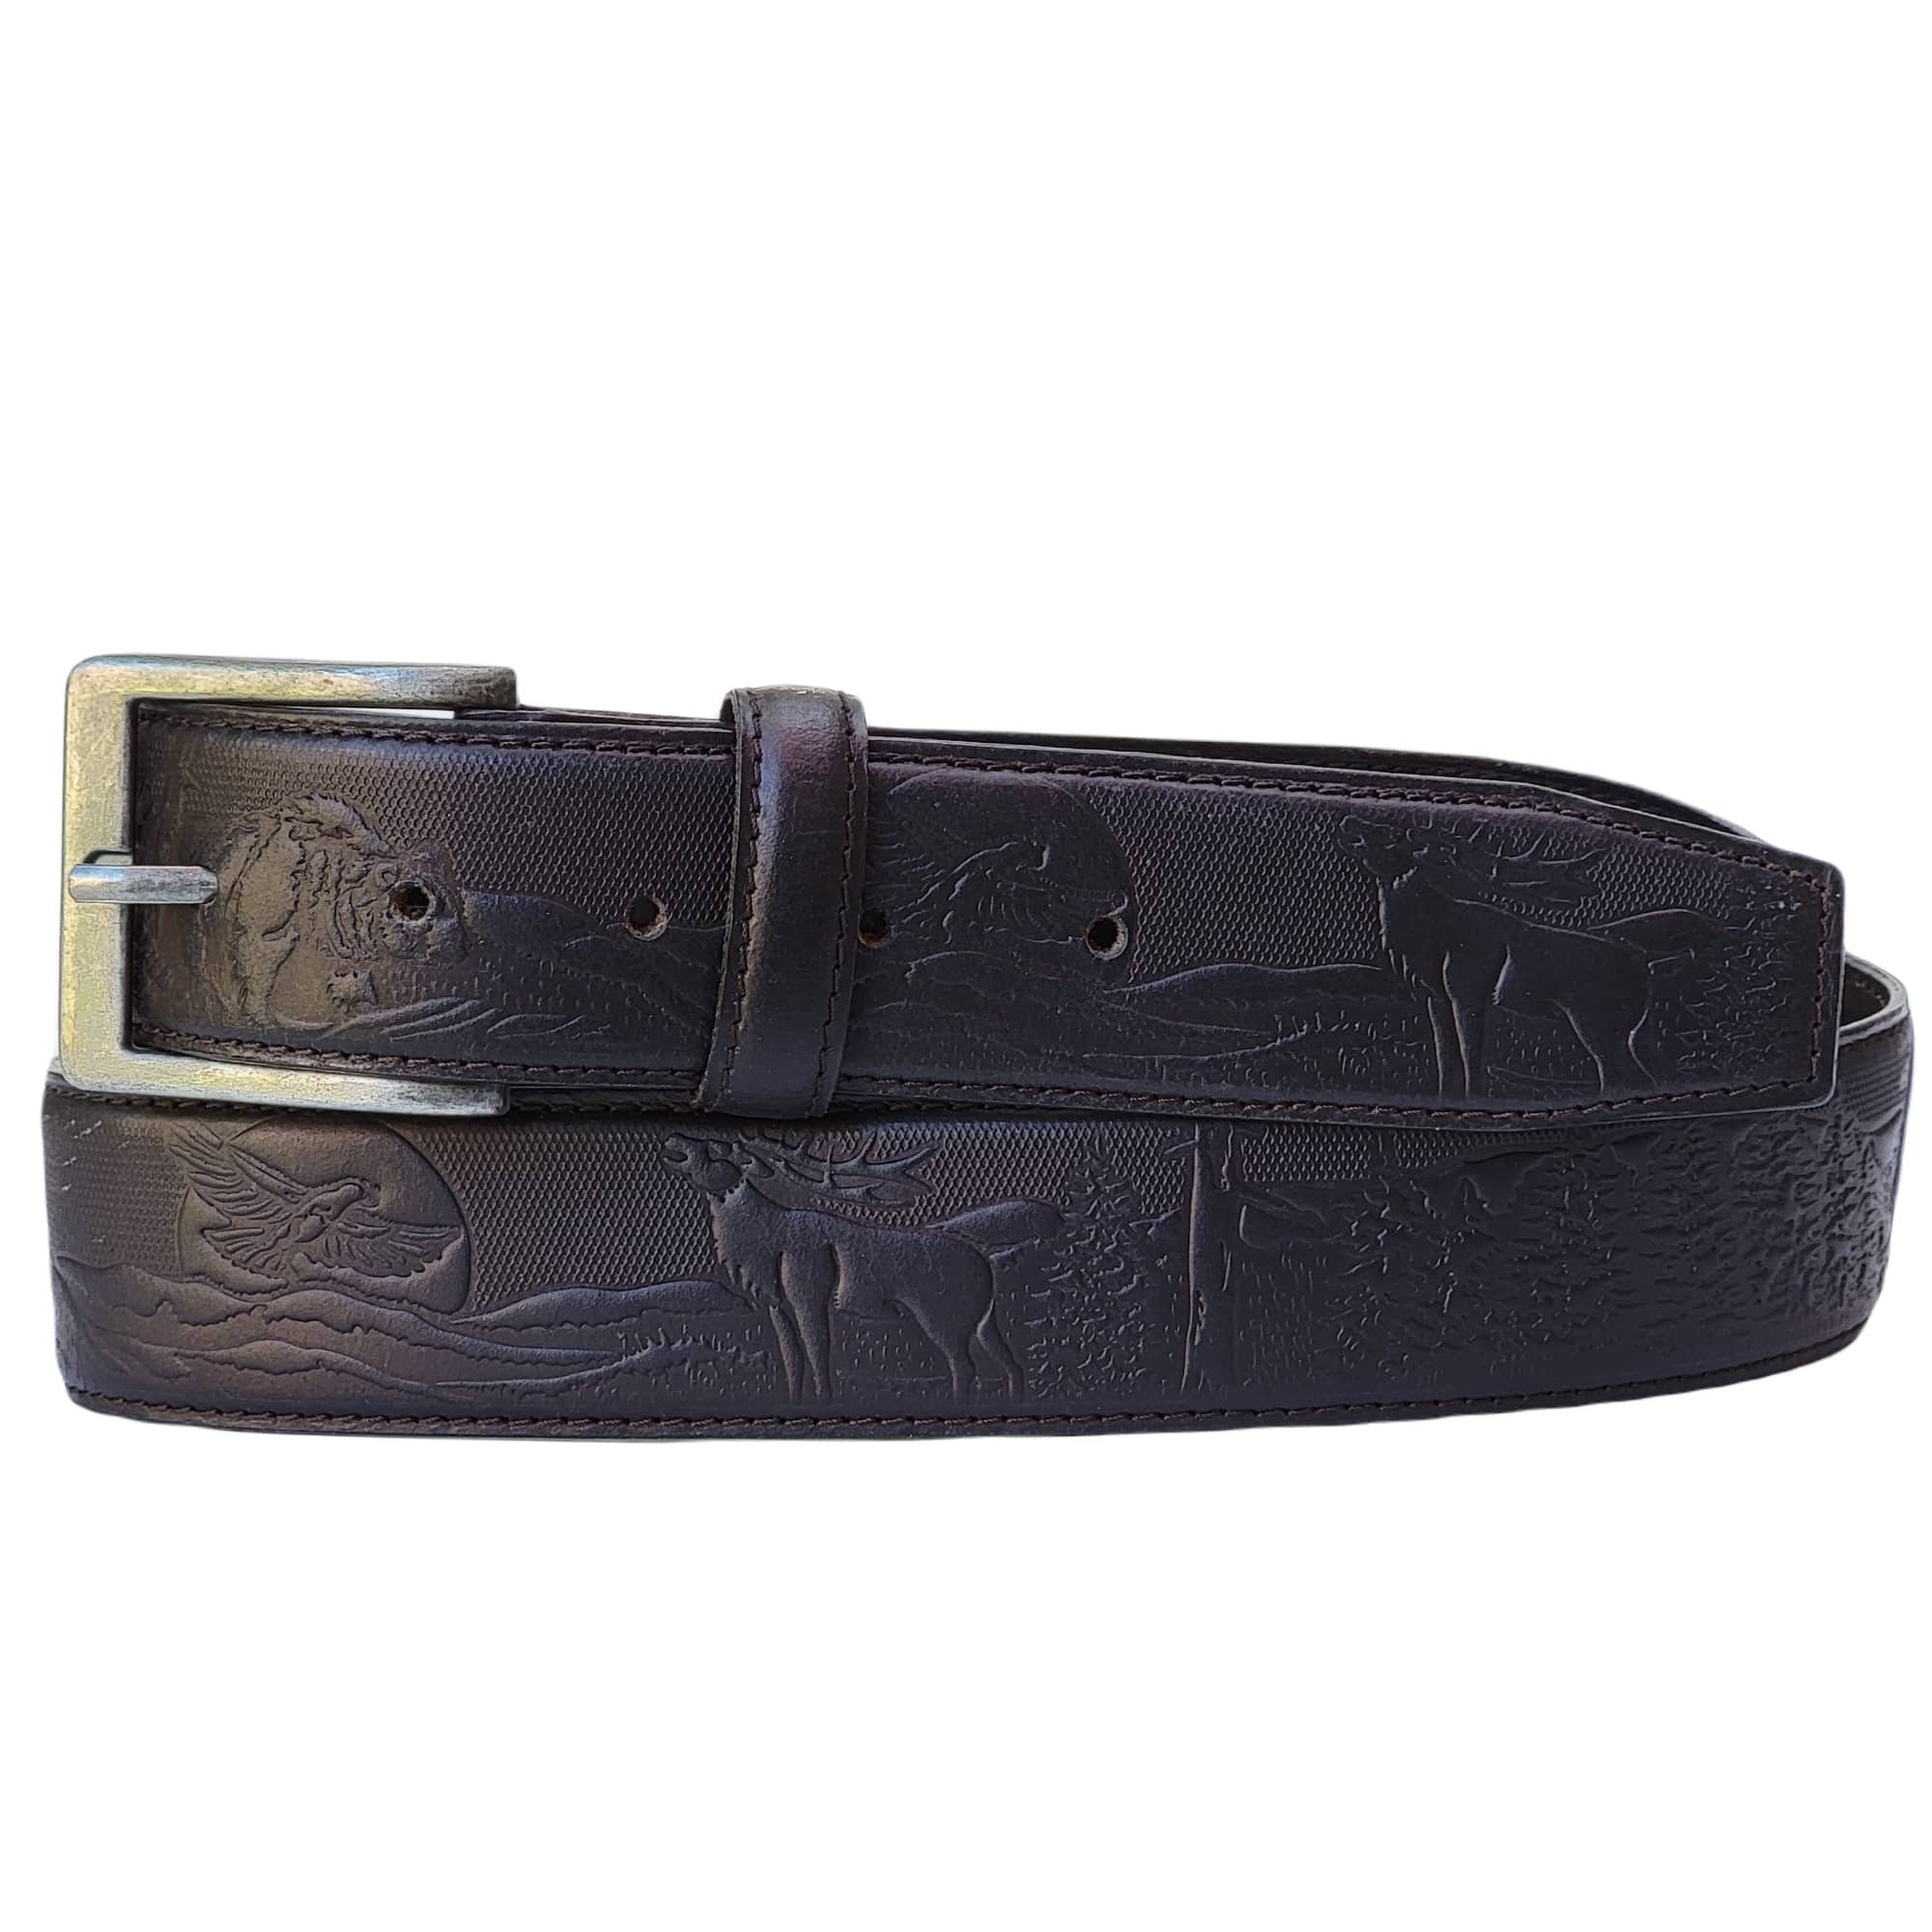 Wildlife Embossed for Belt Belt, Embossed, Leather 100% in Him, Gift Made HANDCRAFTED Embossed Dad Gift Canada, Full - for Leather Grain Etsy